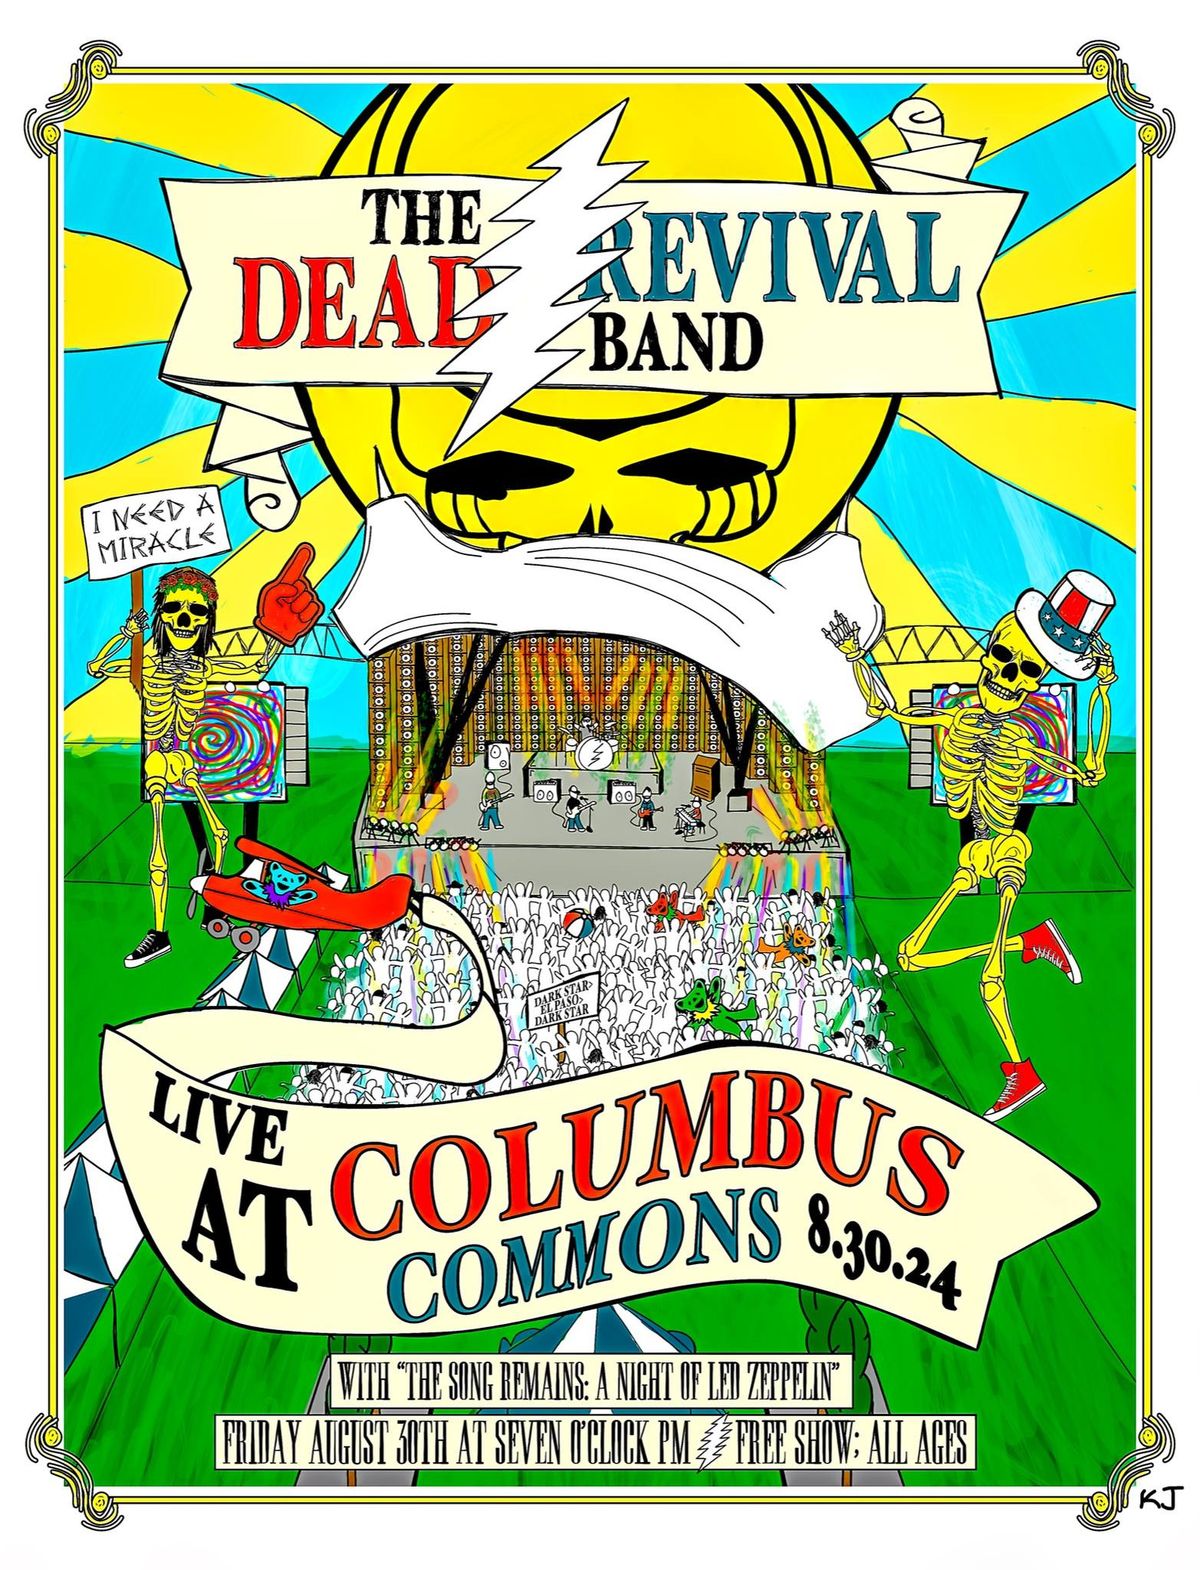 The Dead Revival Band @ Columbus Commons - FREE SHOW 